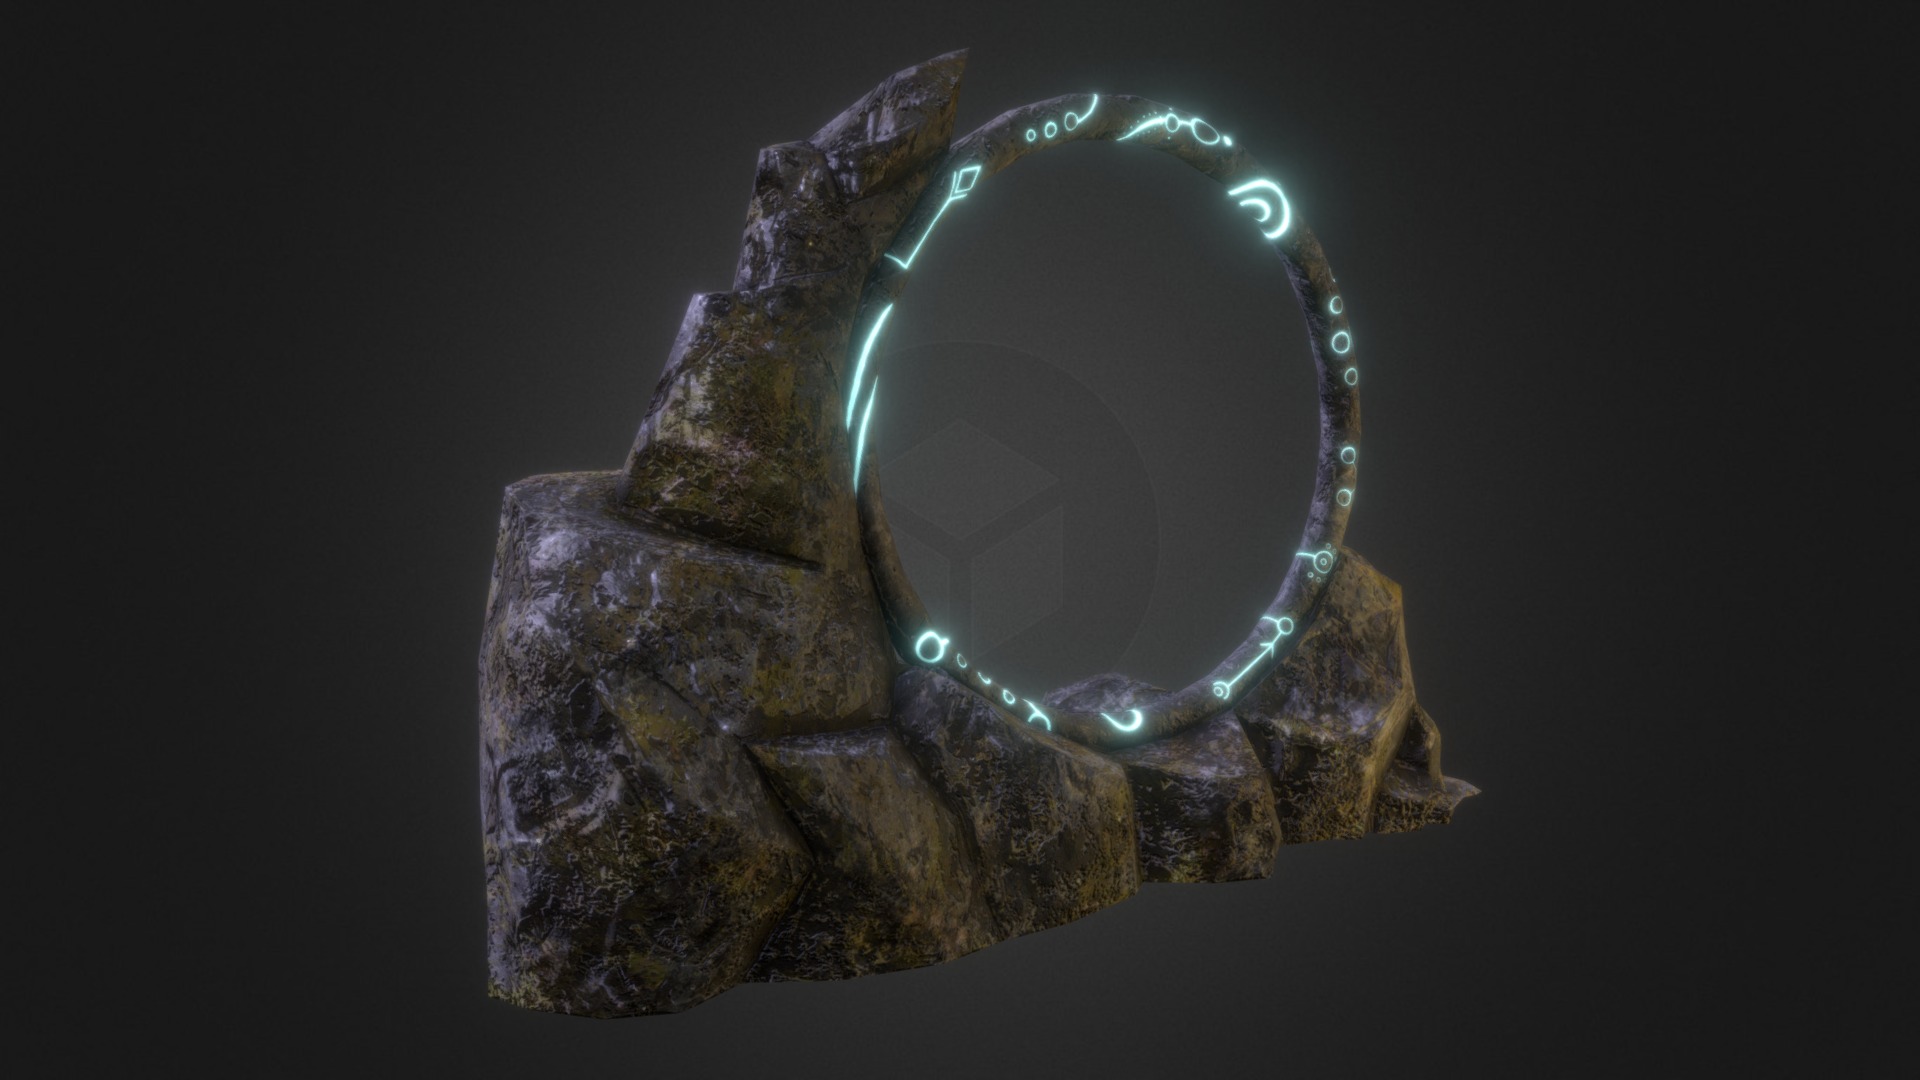 A stone portal, with glyphs on the rings. Modeled in Maya, and textured in Substance Painter (maps edited in Photoshop).

Original idea drawn by Magdalena Mieszczak on ArtStation.
https://www.artstation.com/artwork/VakEX - Stone Portal and Glyphs - 3D model by Christian Carter (@christiancarter493) 3d model